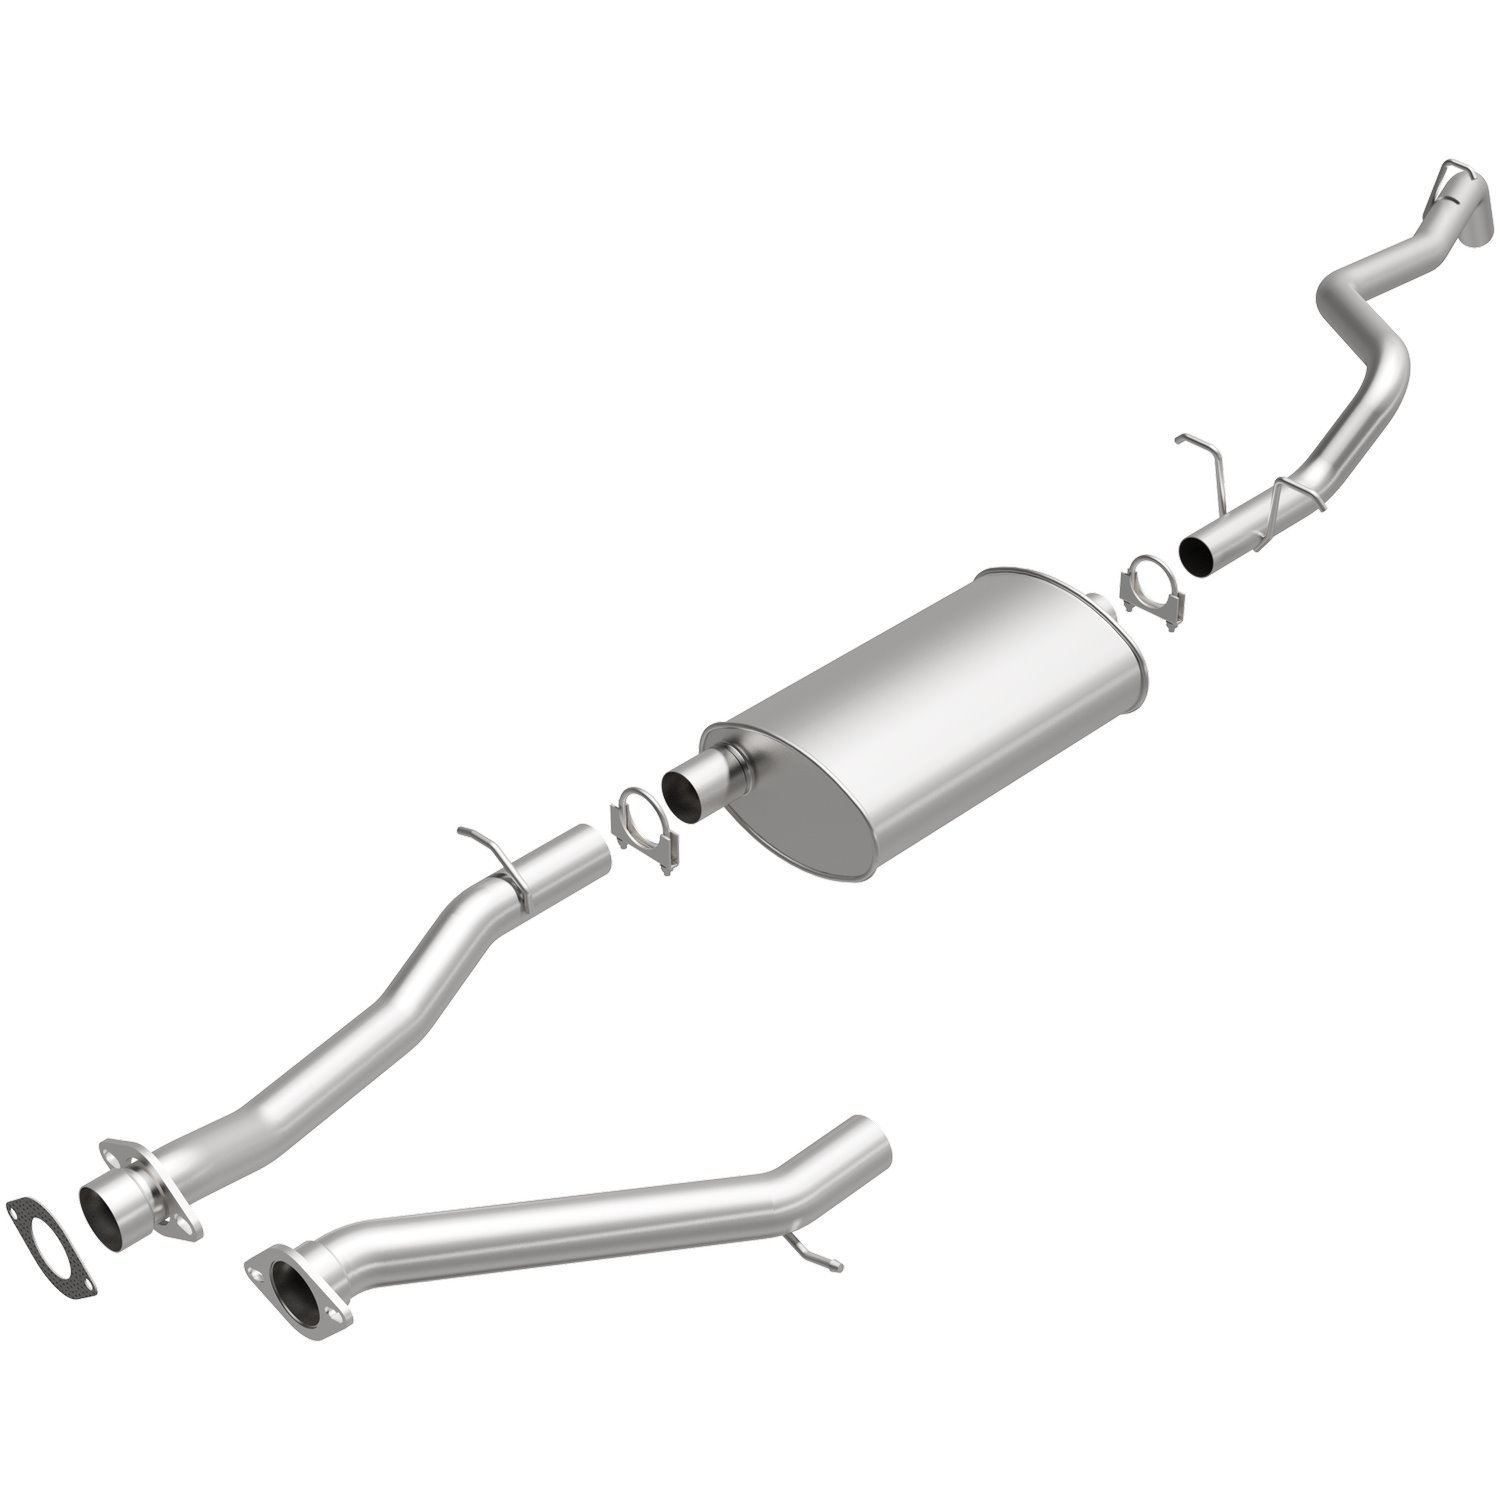 Direct-Fit Exhaust Kit, 2000-2004 GM S10/Sonoma 4.3L